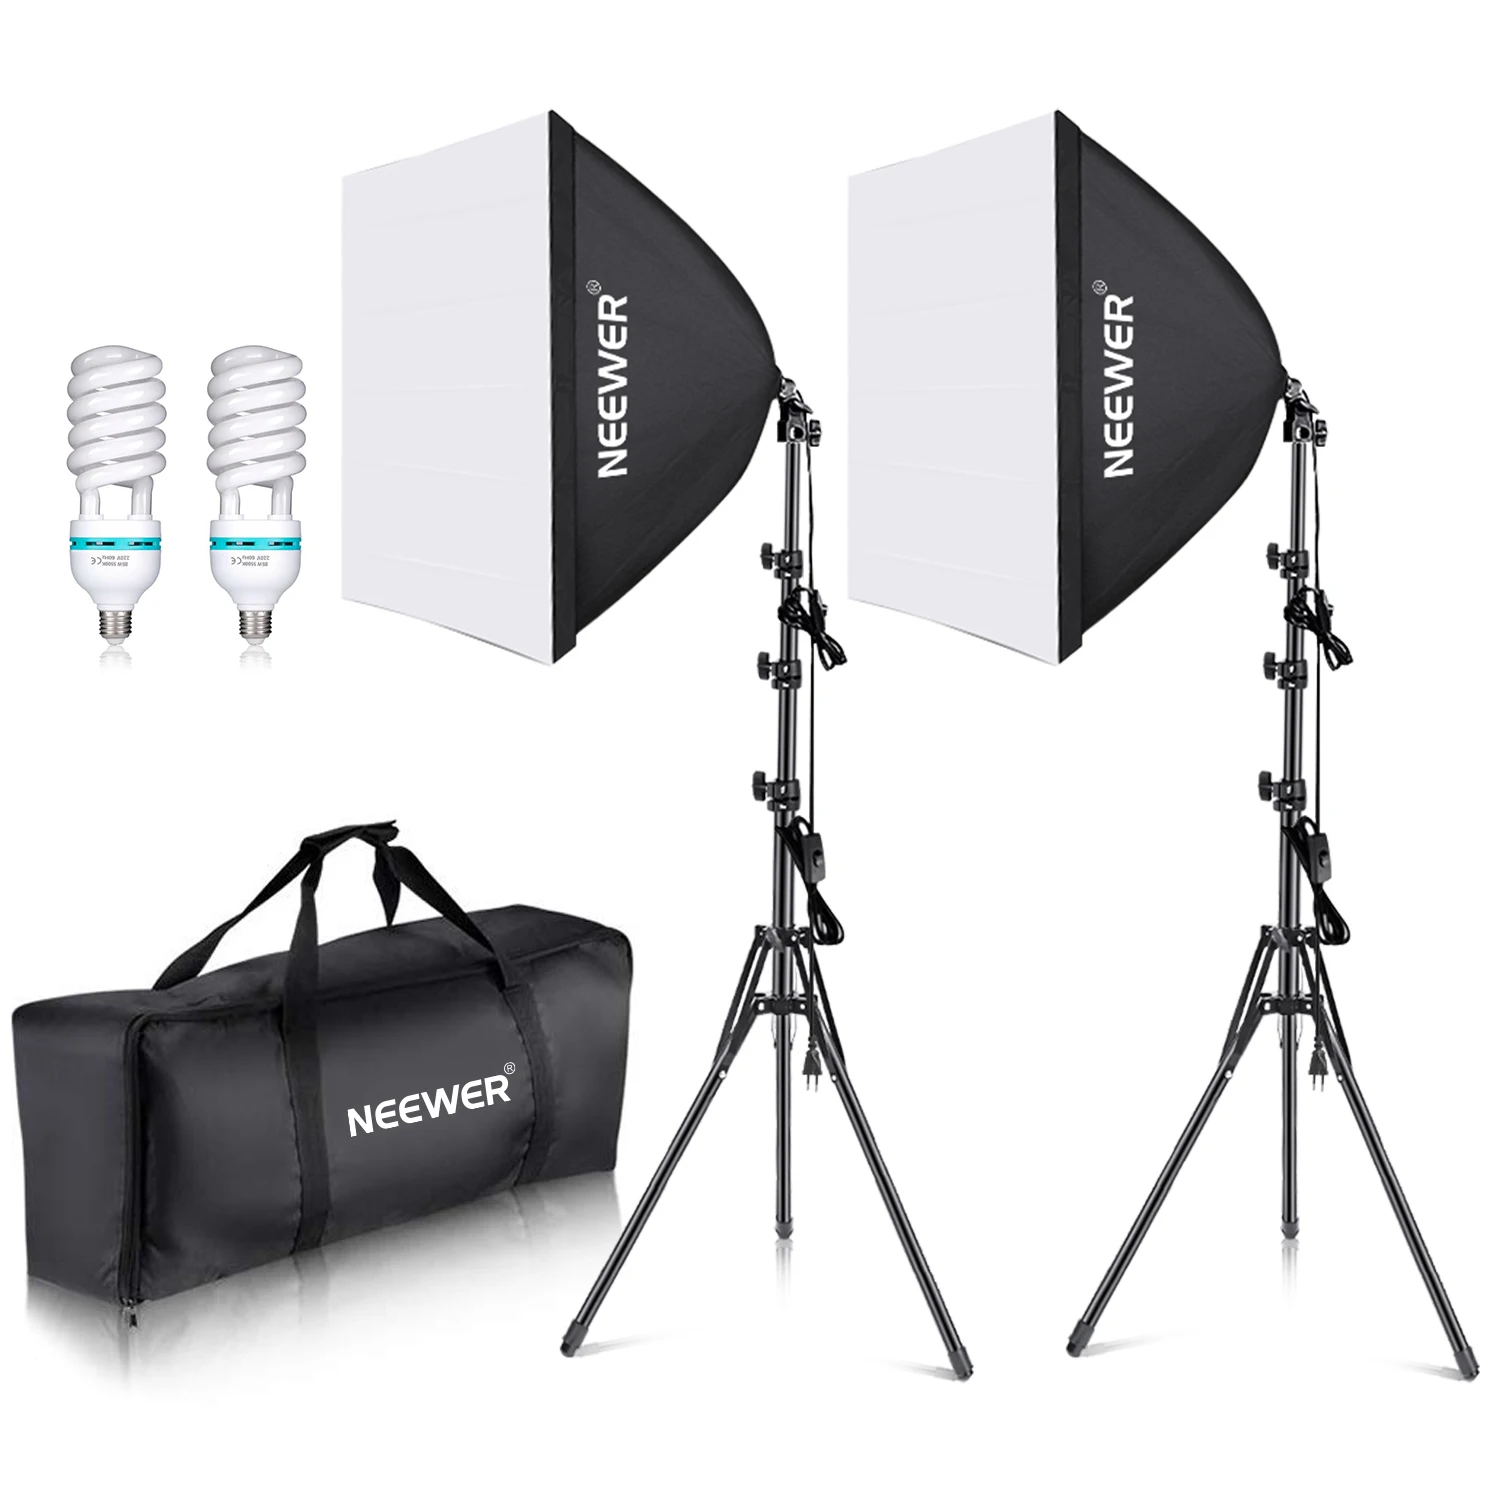 

NEEWER 700W Equivalent Softbox Lighting Kit, 2Pack 5500K CFL Lighting Bulbs, 24x24 Inches Softboxes With E27 Socket